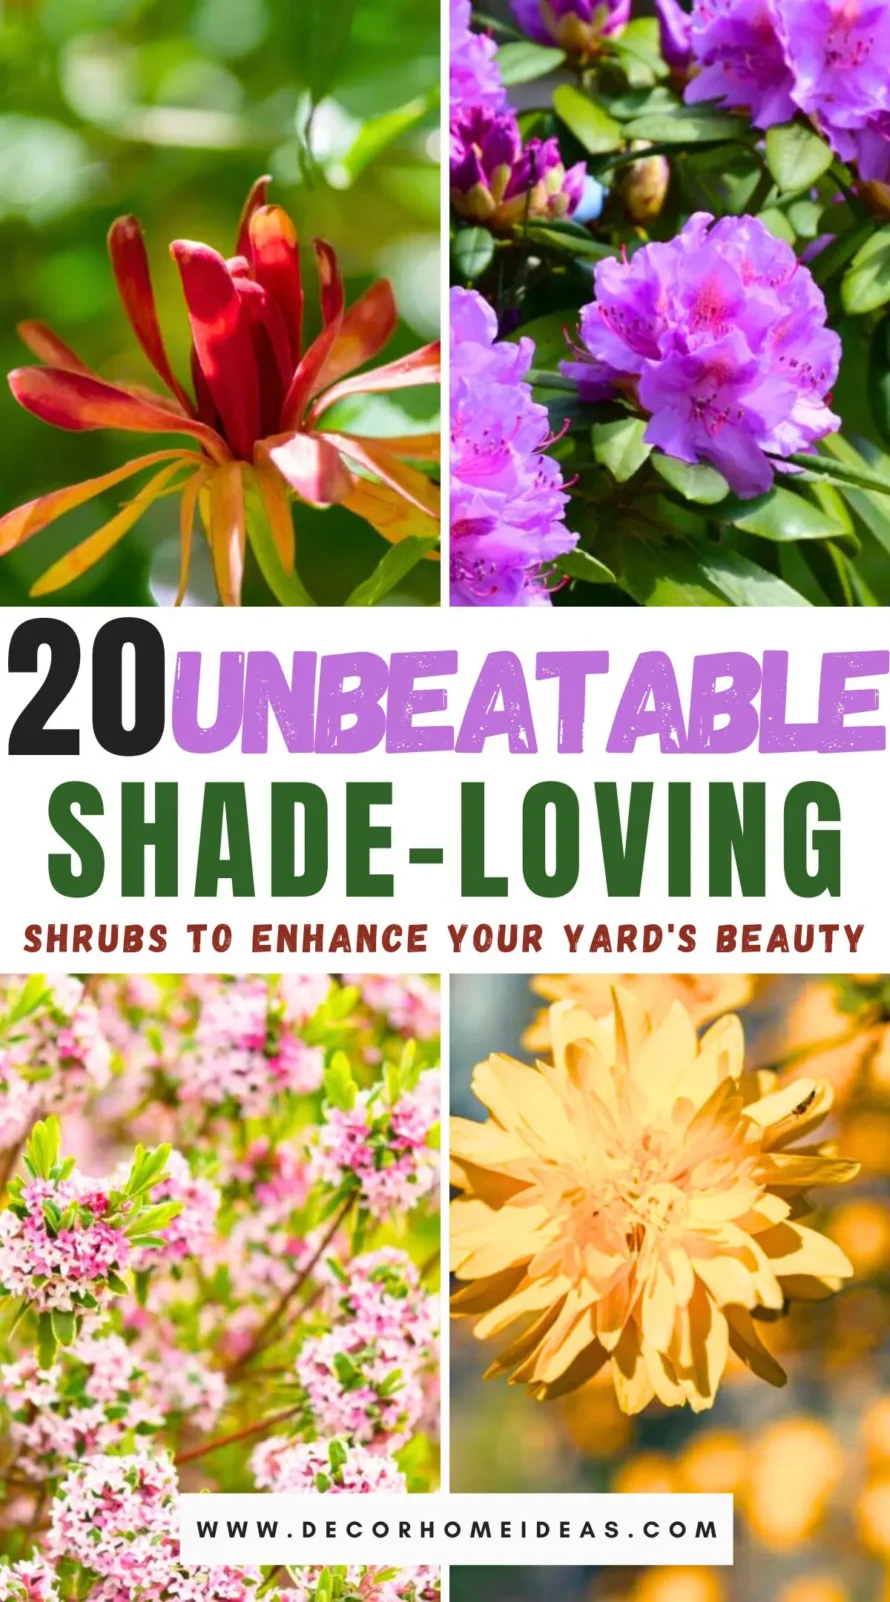 Discover 20 unbeatable shade-loving shrubs that will transform your yard into a lush, verdant paradise. Perfect for those tricky low-light areas, these hardy plants not only thrive in the shade but also add vibrant colors and textures to your garden. Curious about which shrubs made the list? Find out more in our detailed guide!